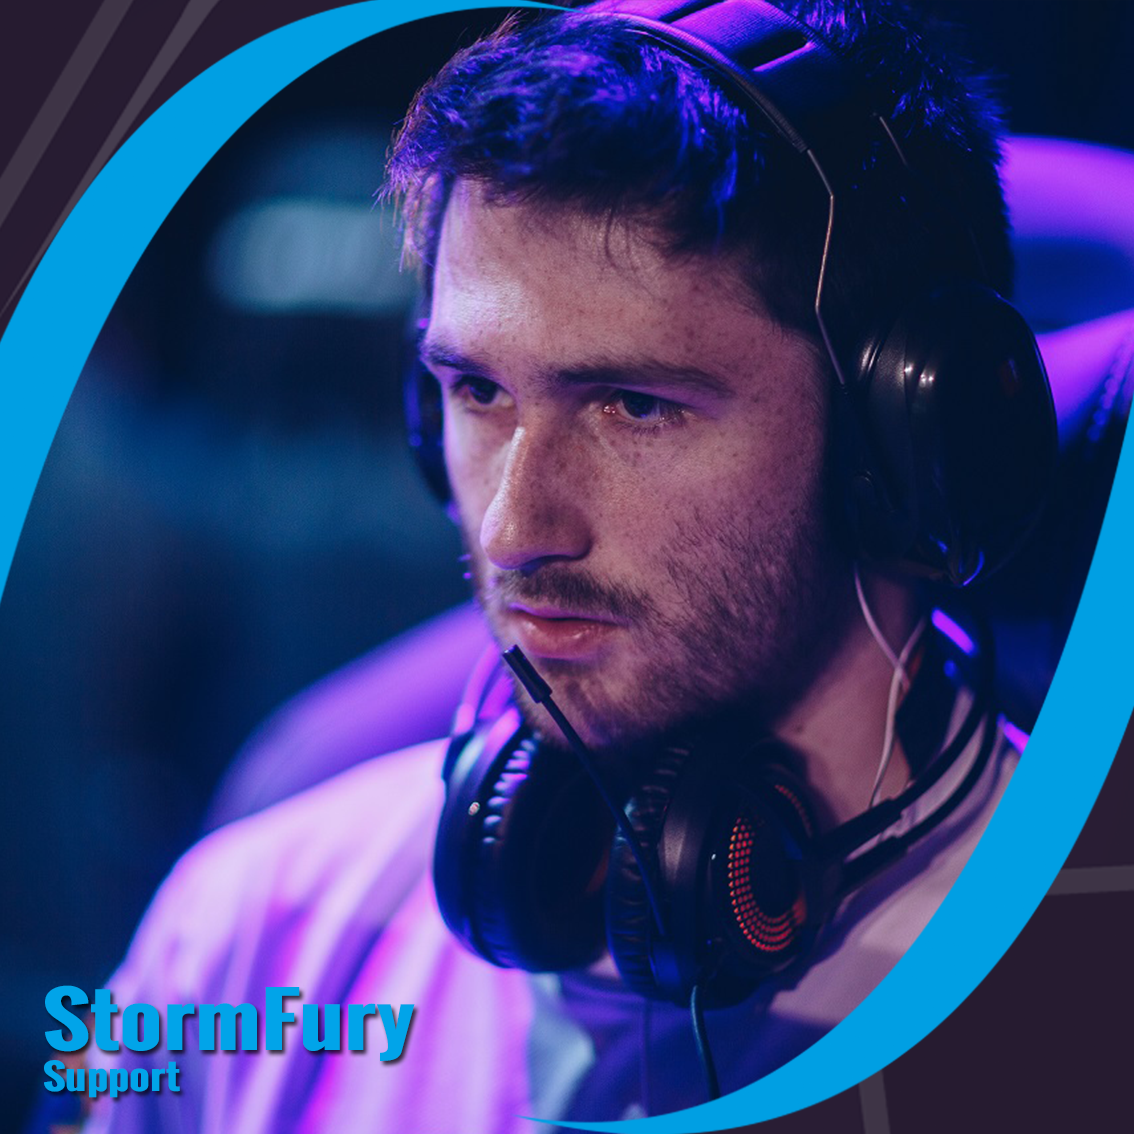 Substitute Support - Max "StormFury" Schaller, Tickling Tentacles wilhaben, A1 Esports League